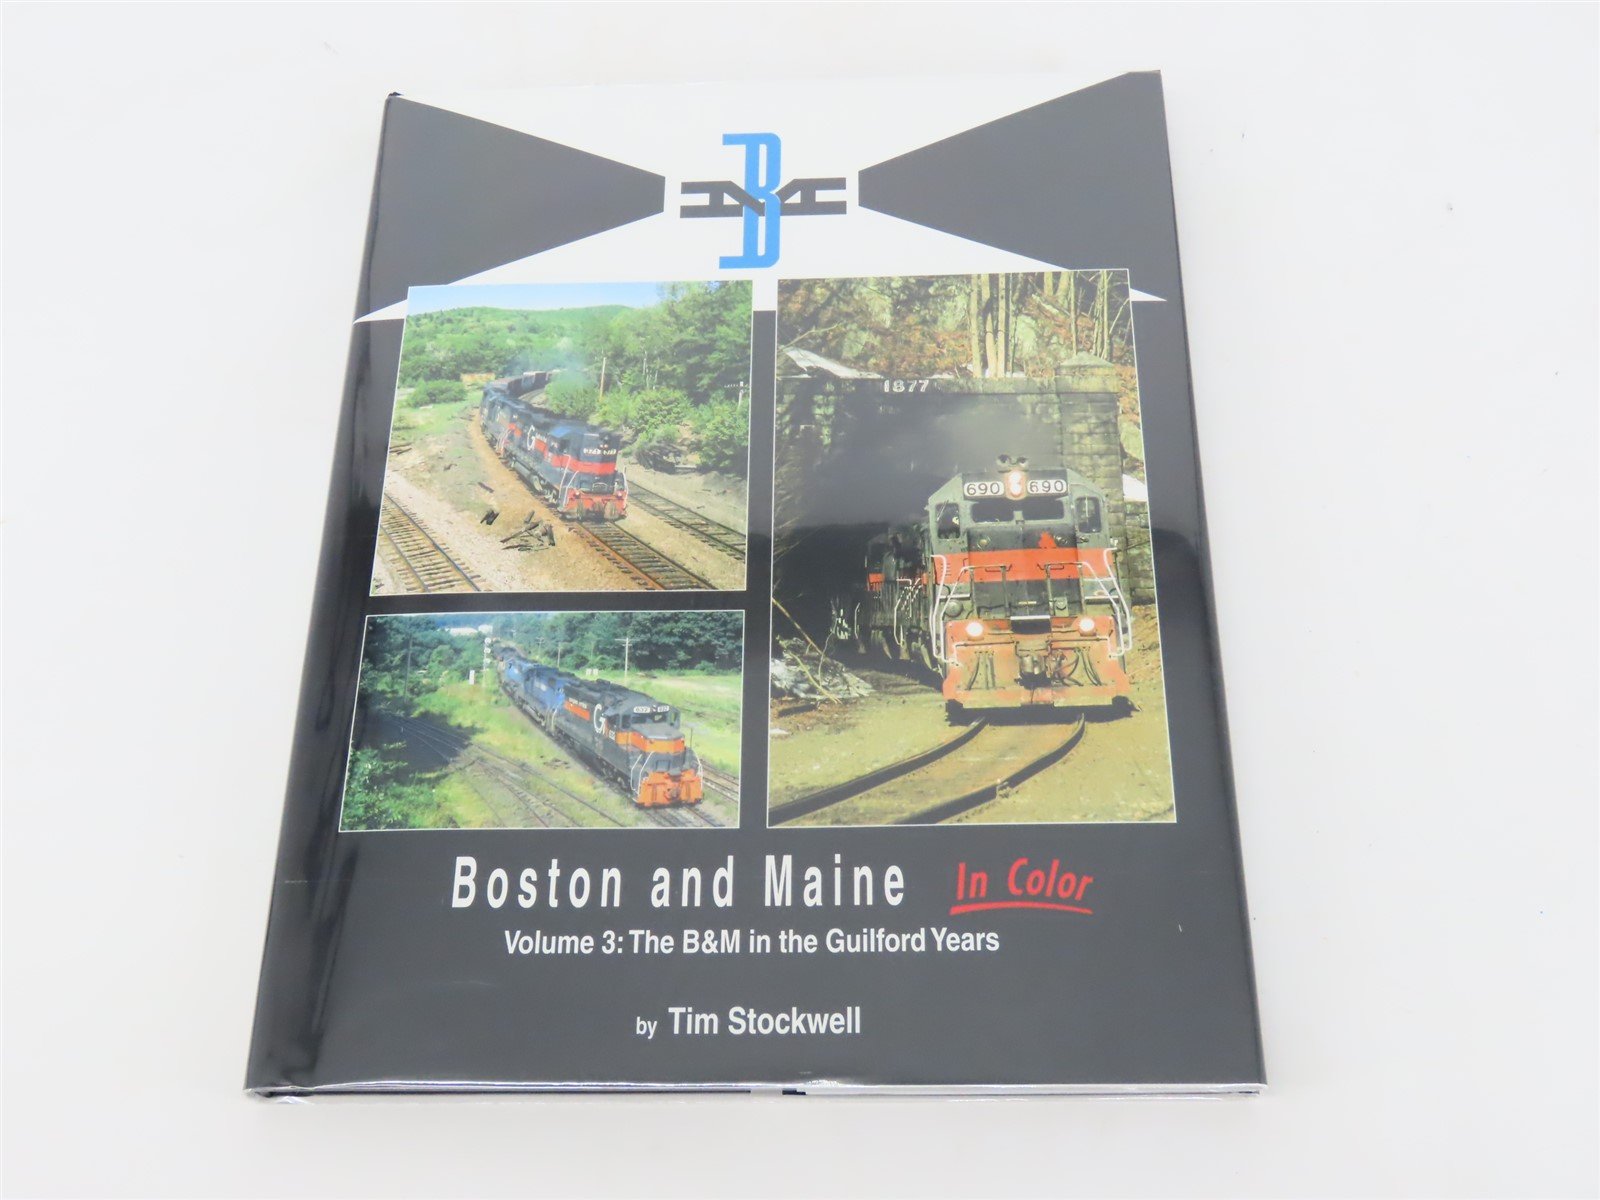 Morning Sun: Boston and Maine Volume 3 by Tim Stockwell ©2015 HC Book